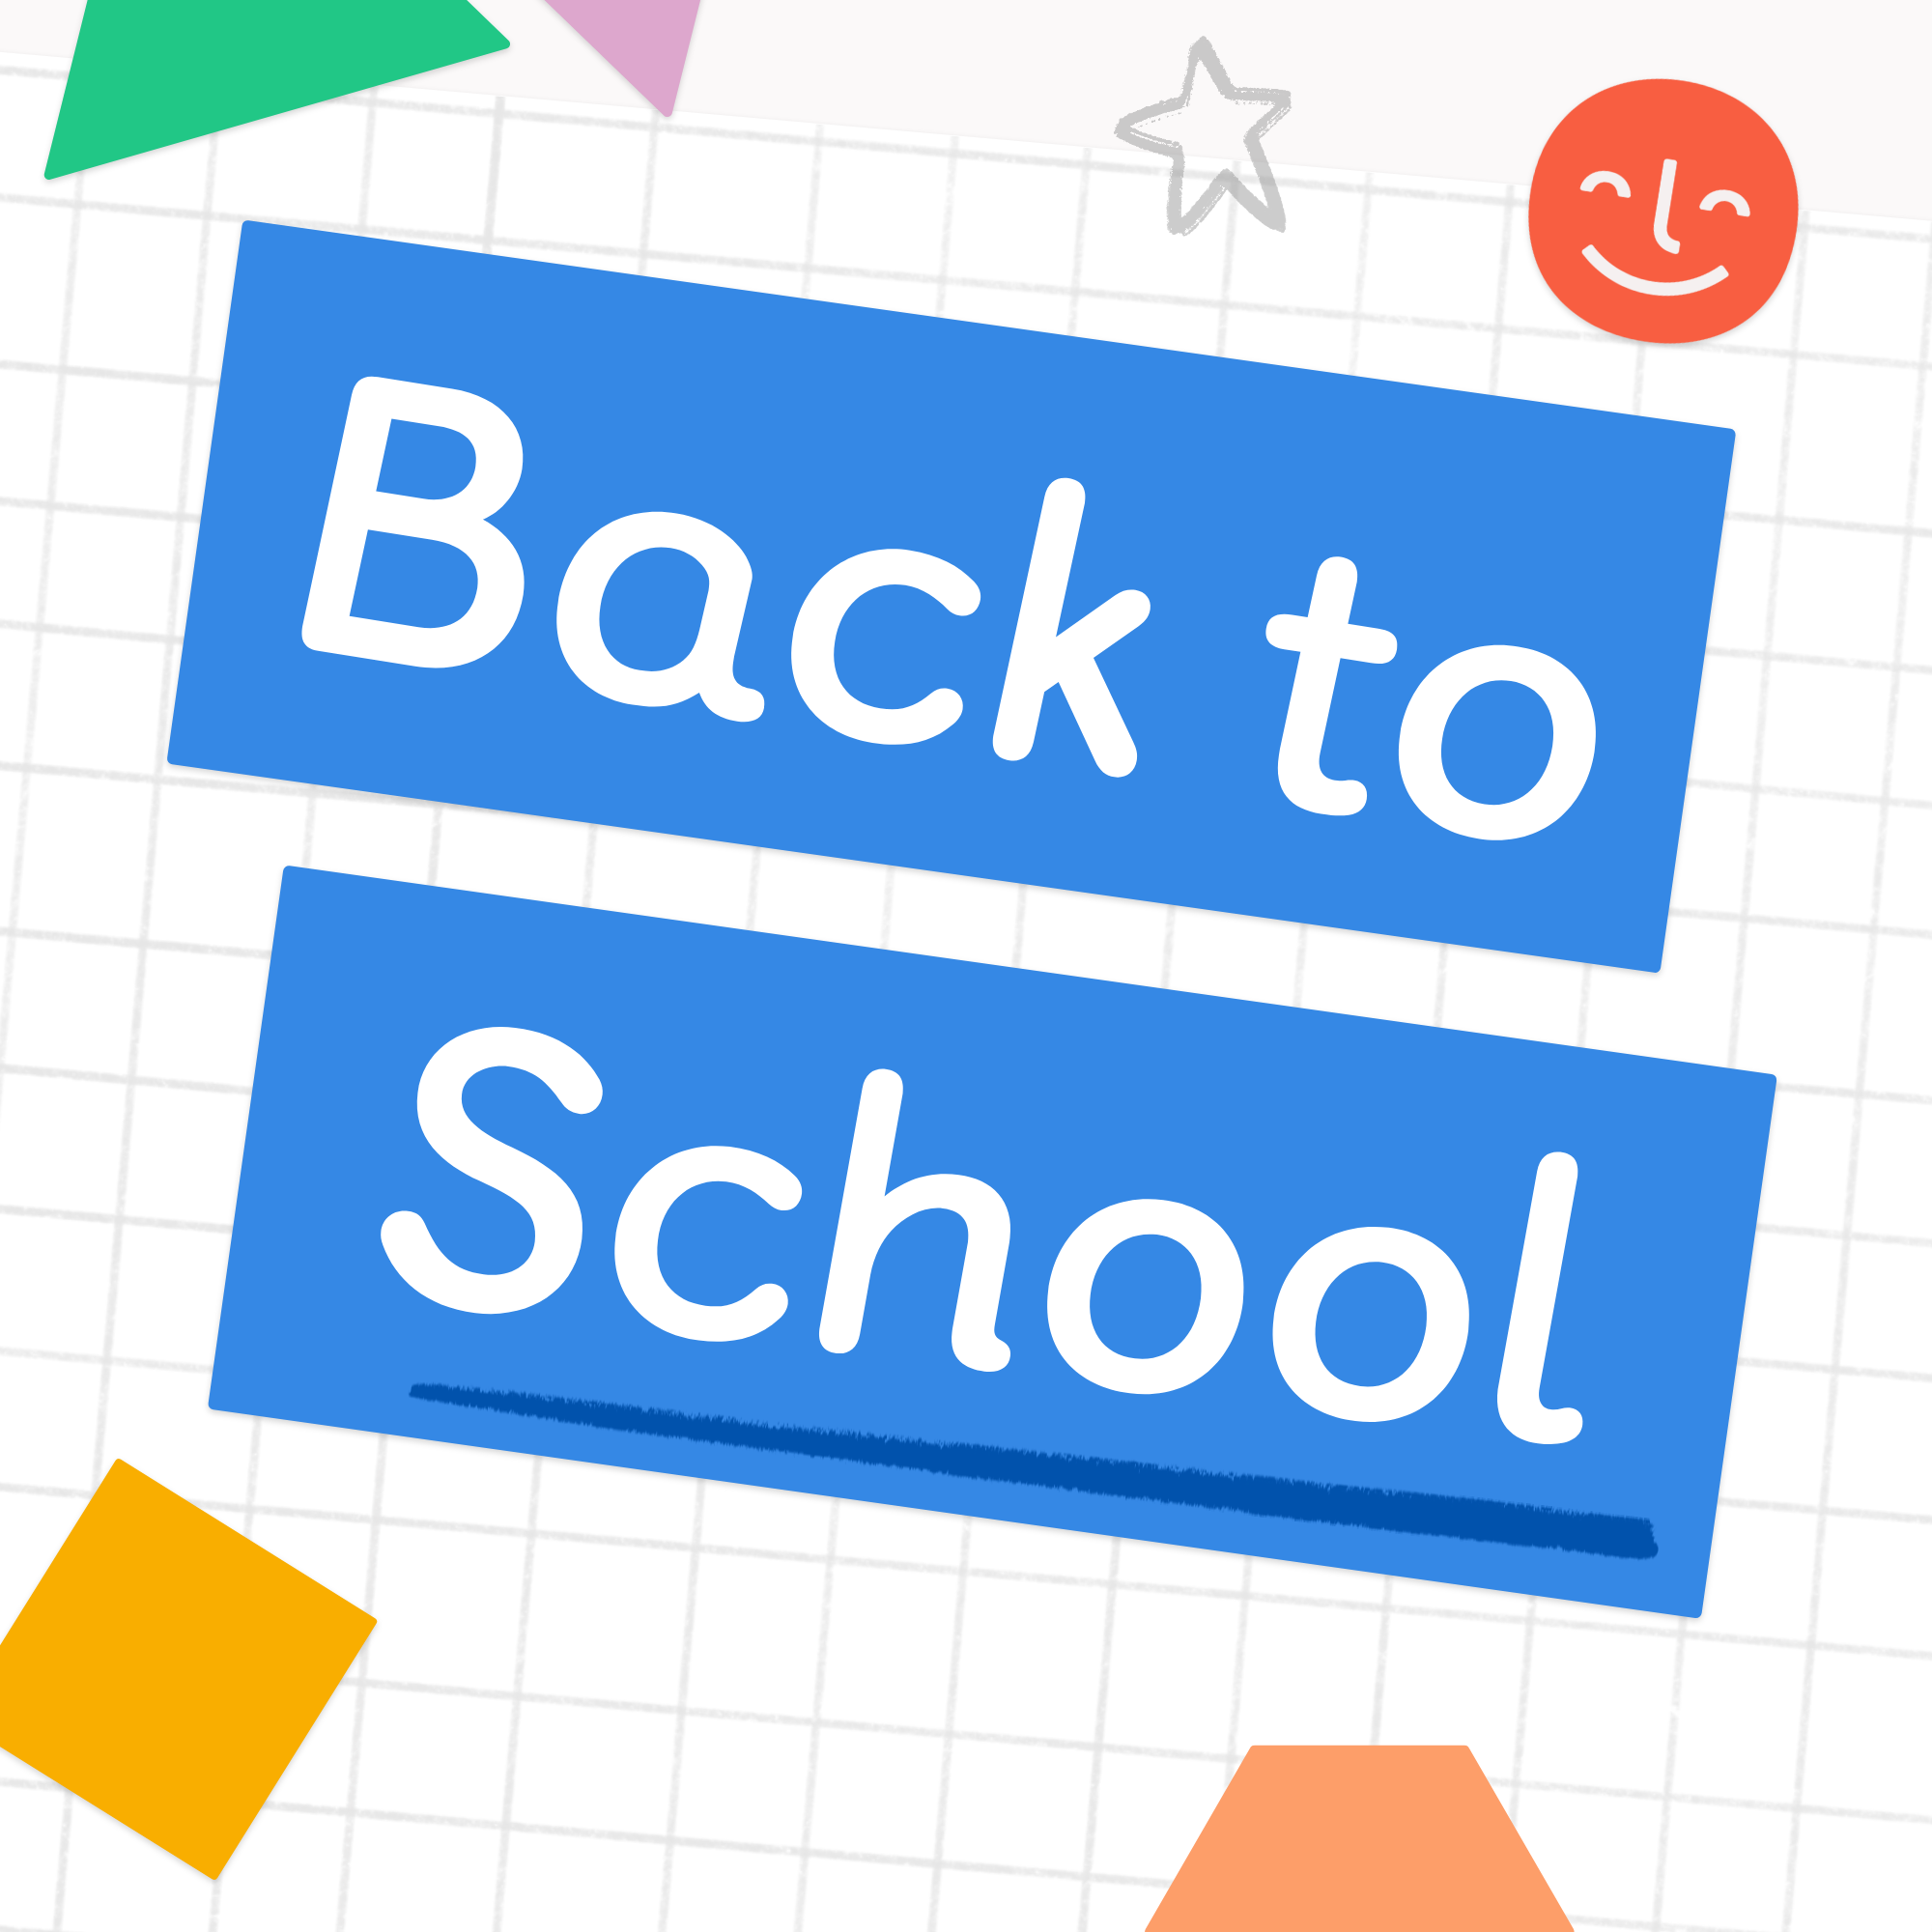 Create a new school routine with Yoto!